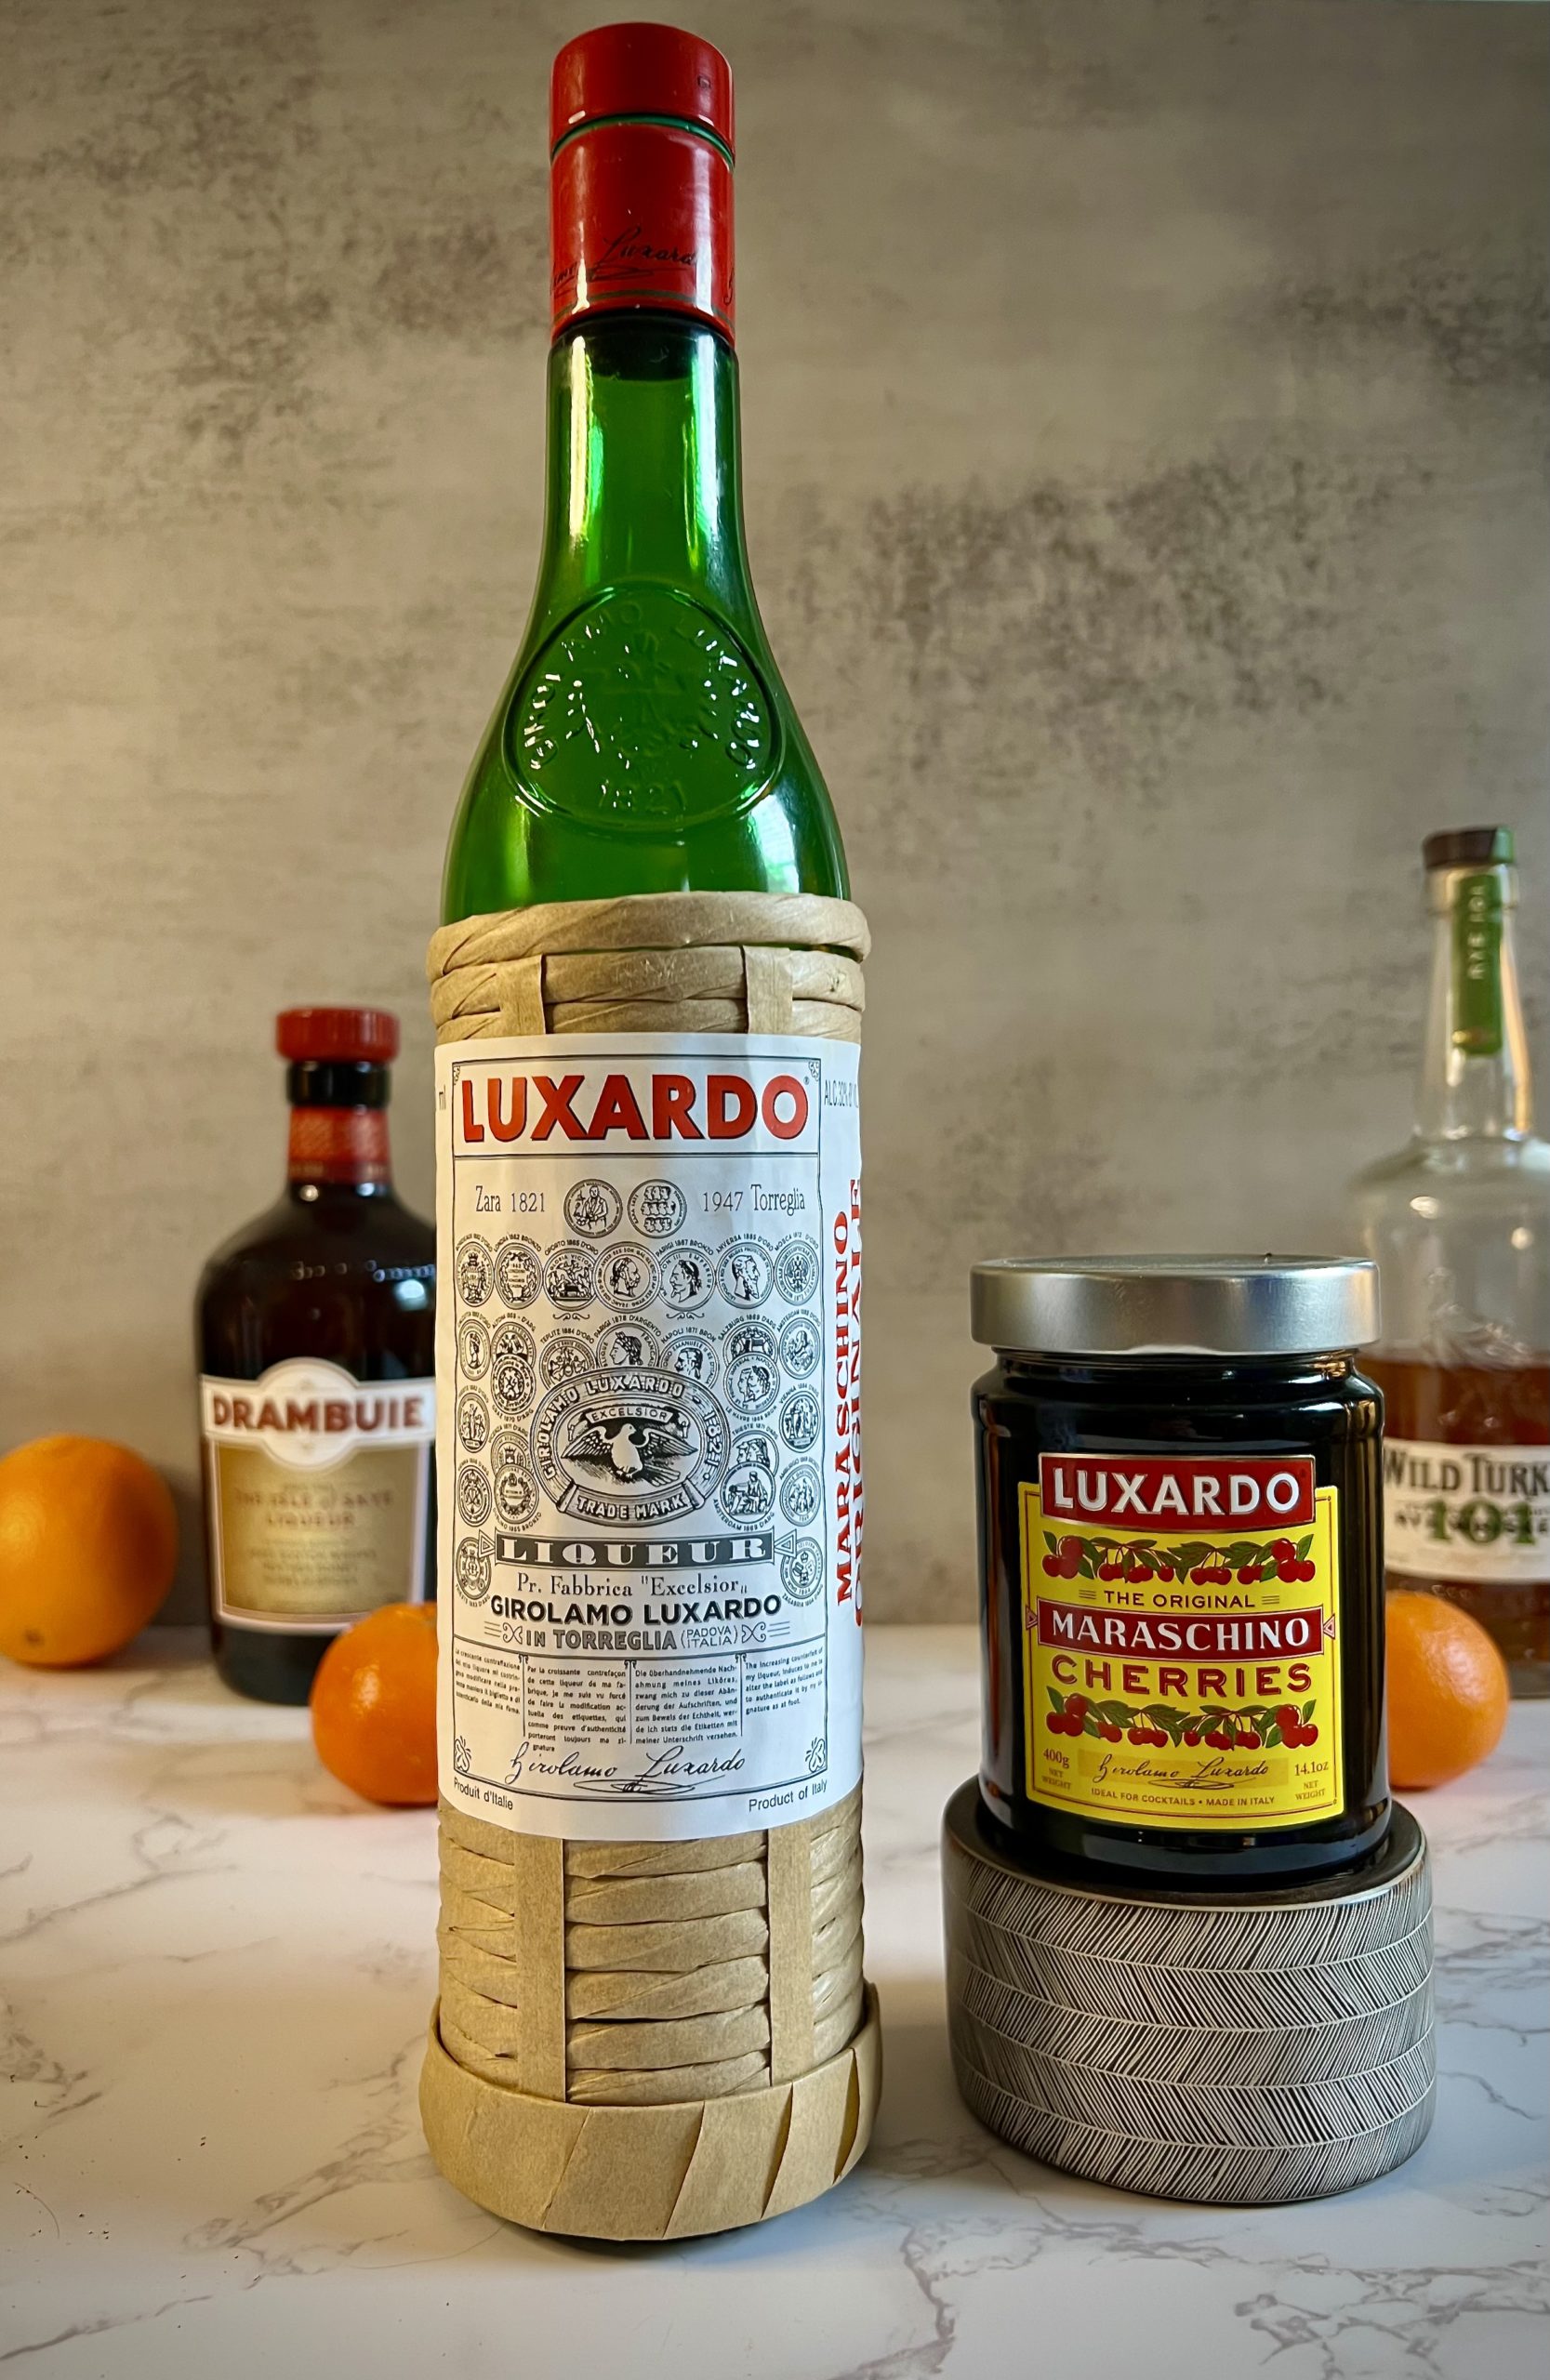 A close up of a bottle of Luxardo Maraschino Originale and Luxardo cherries on a countertop.